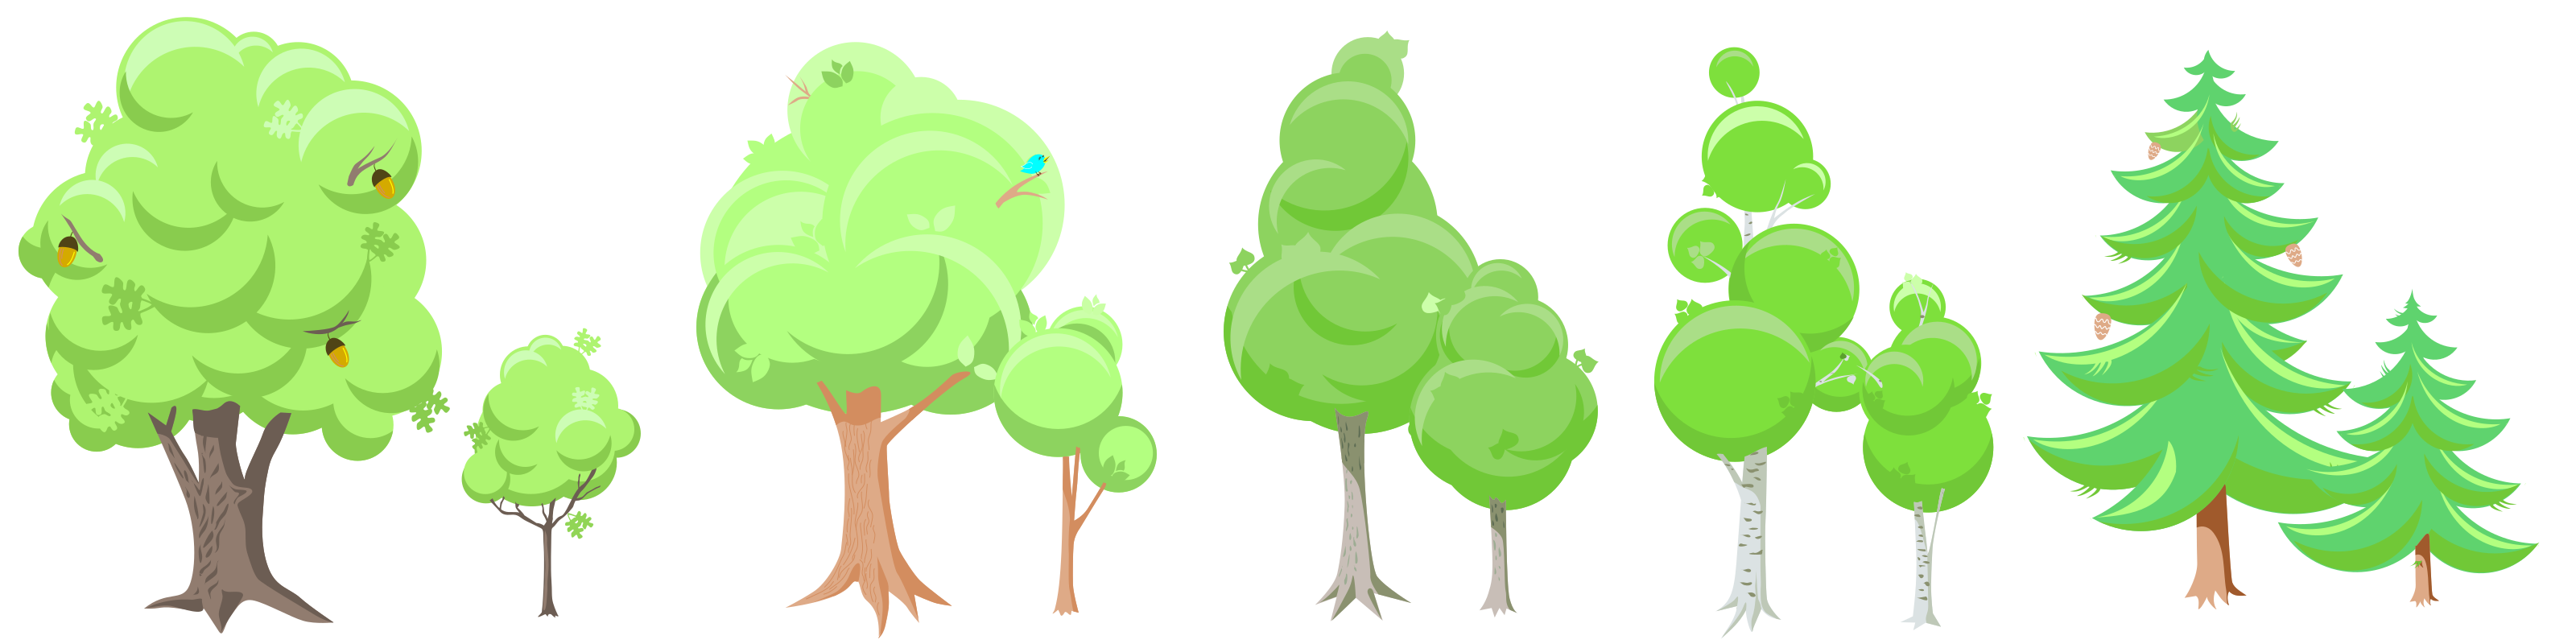 clipart tree png - photo #13